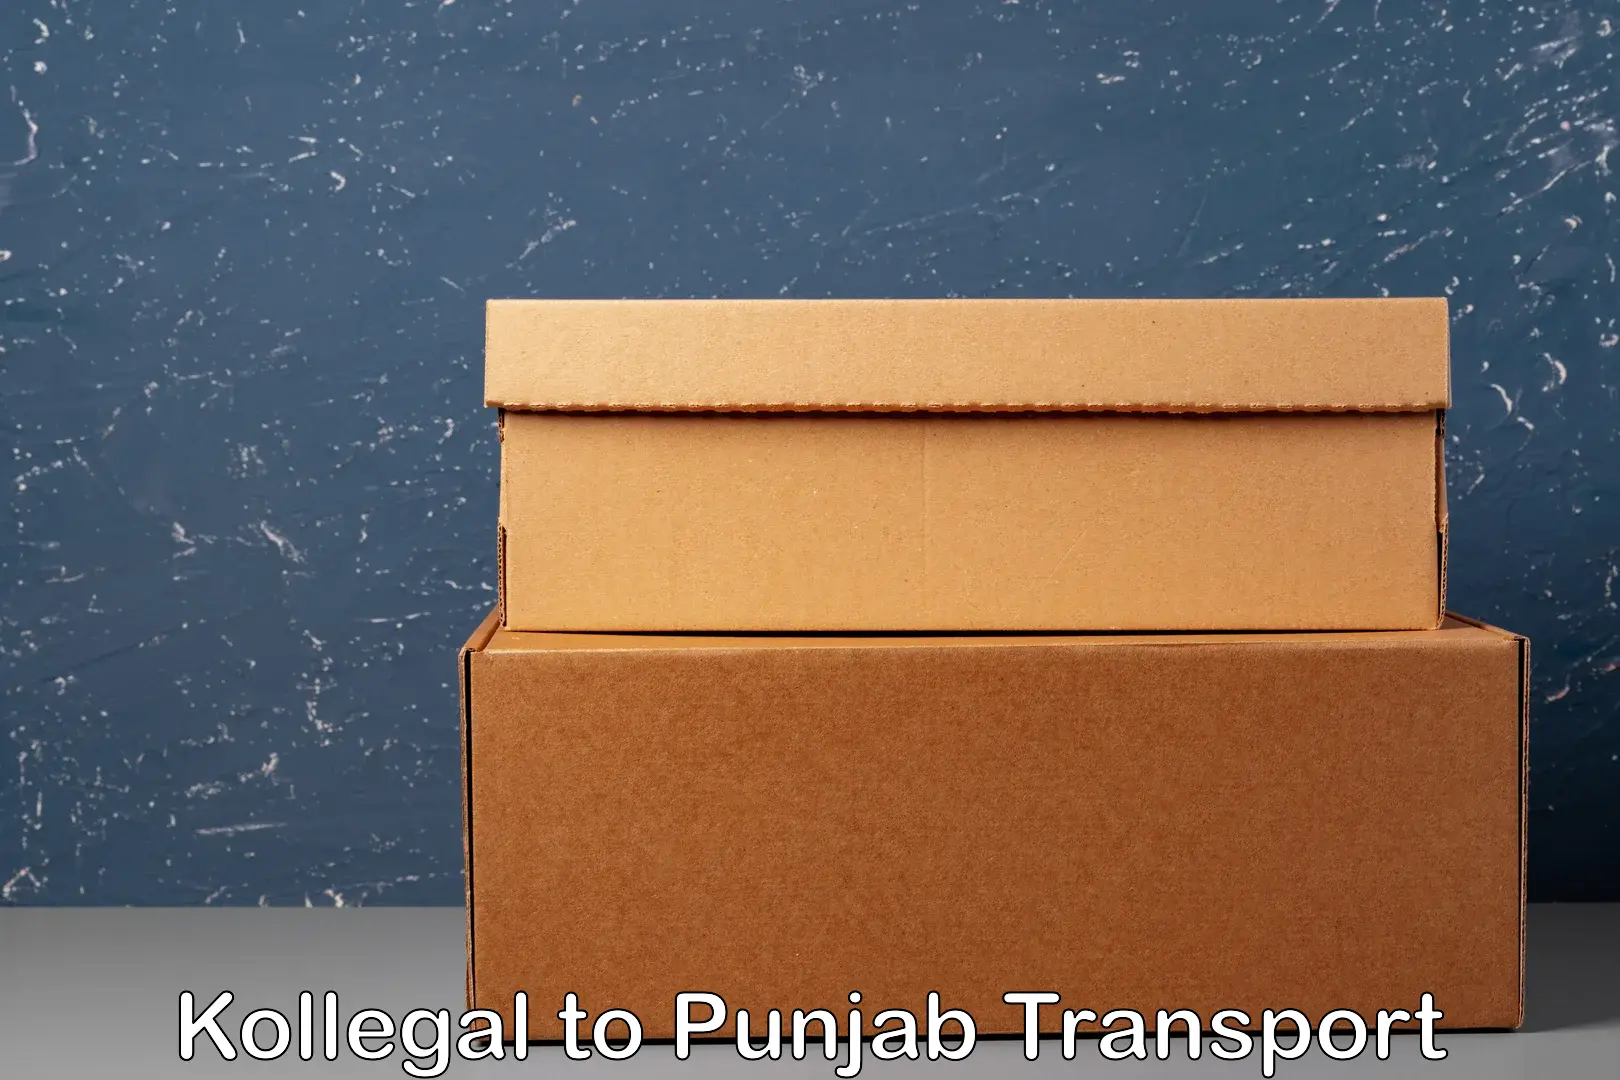 Air freight transport services Kollegal to Talwara